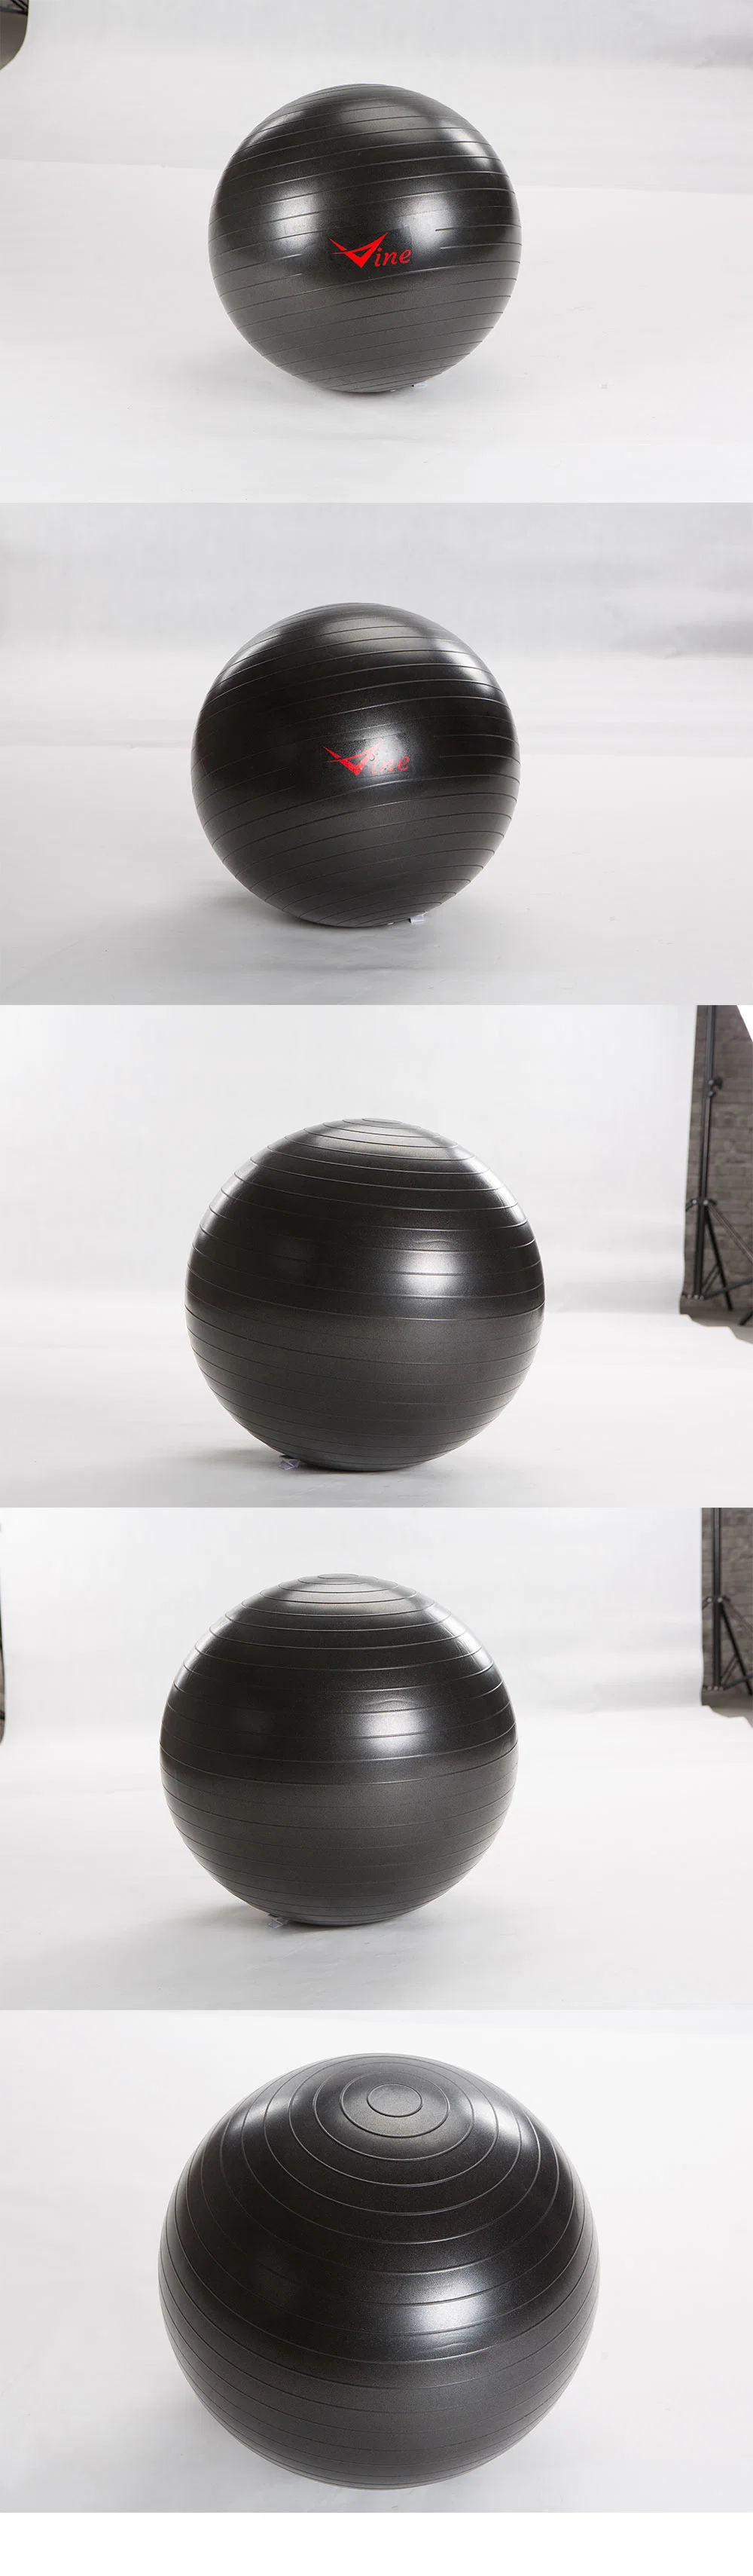 Stability Exercise Ball for Gym and Therapy Training